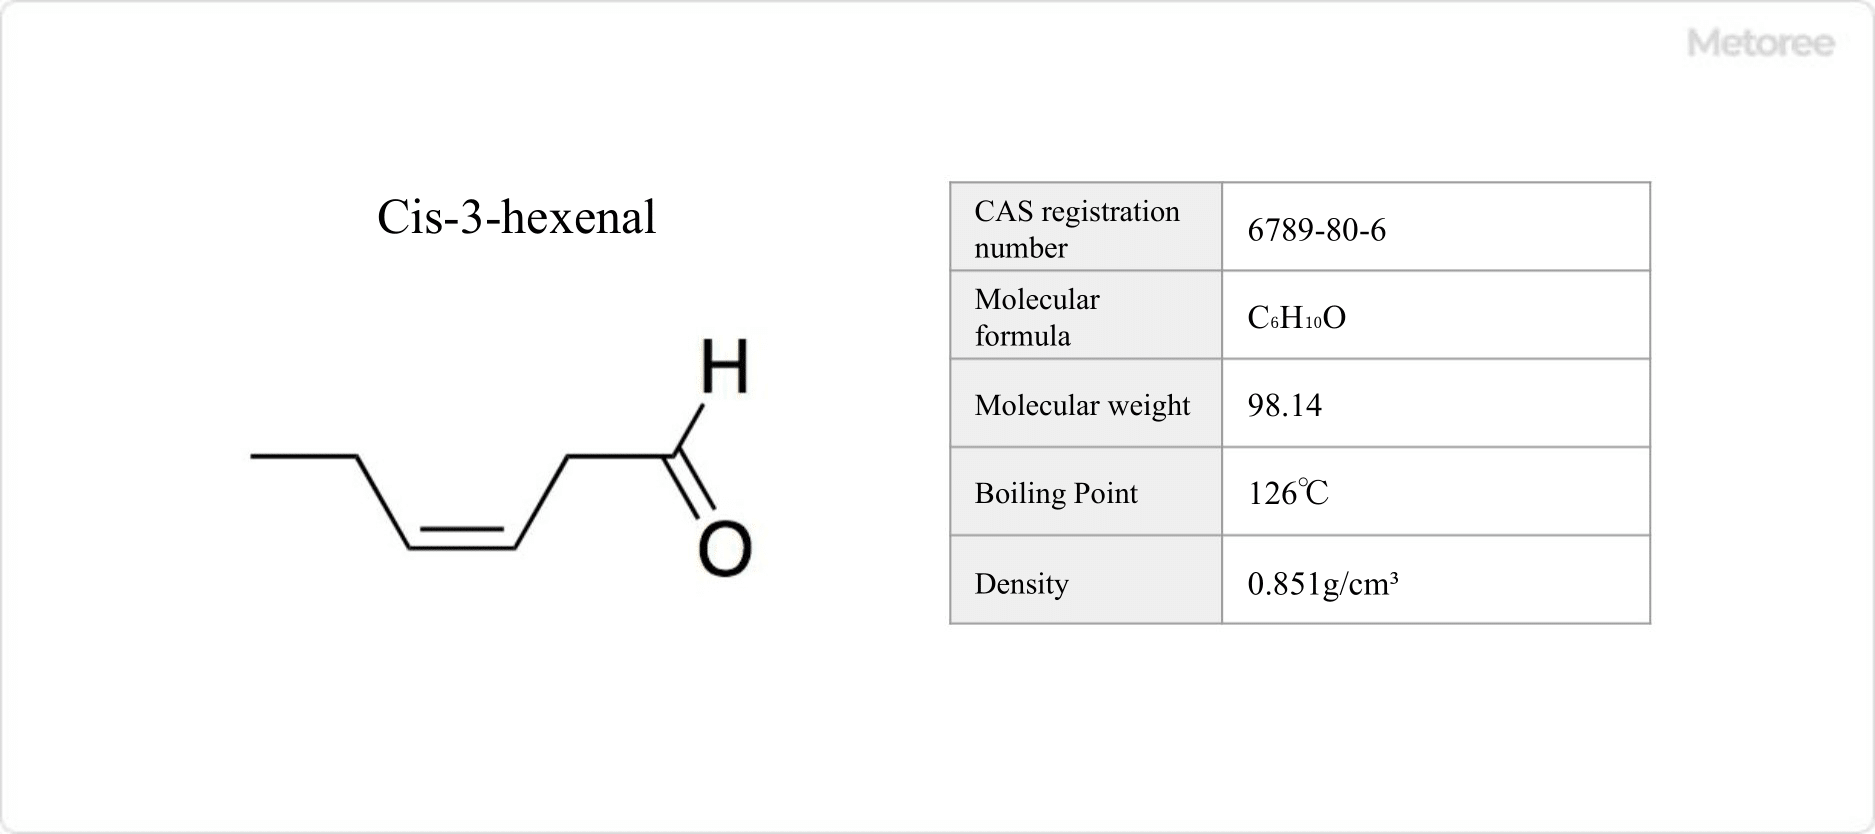 Figure 2. Basic Information on Cis-3-Hexenal